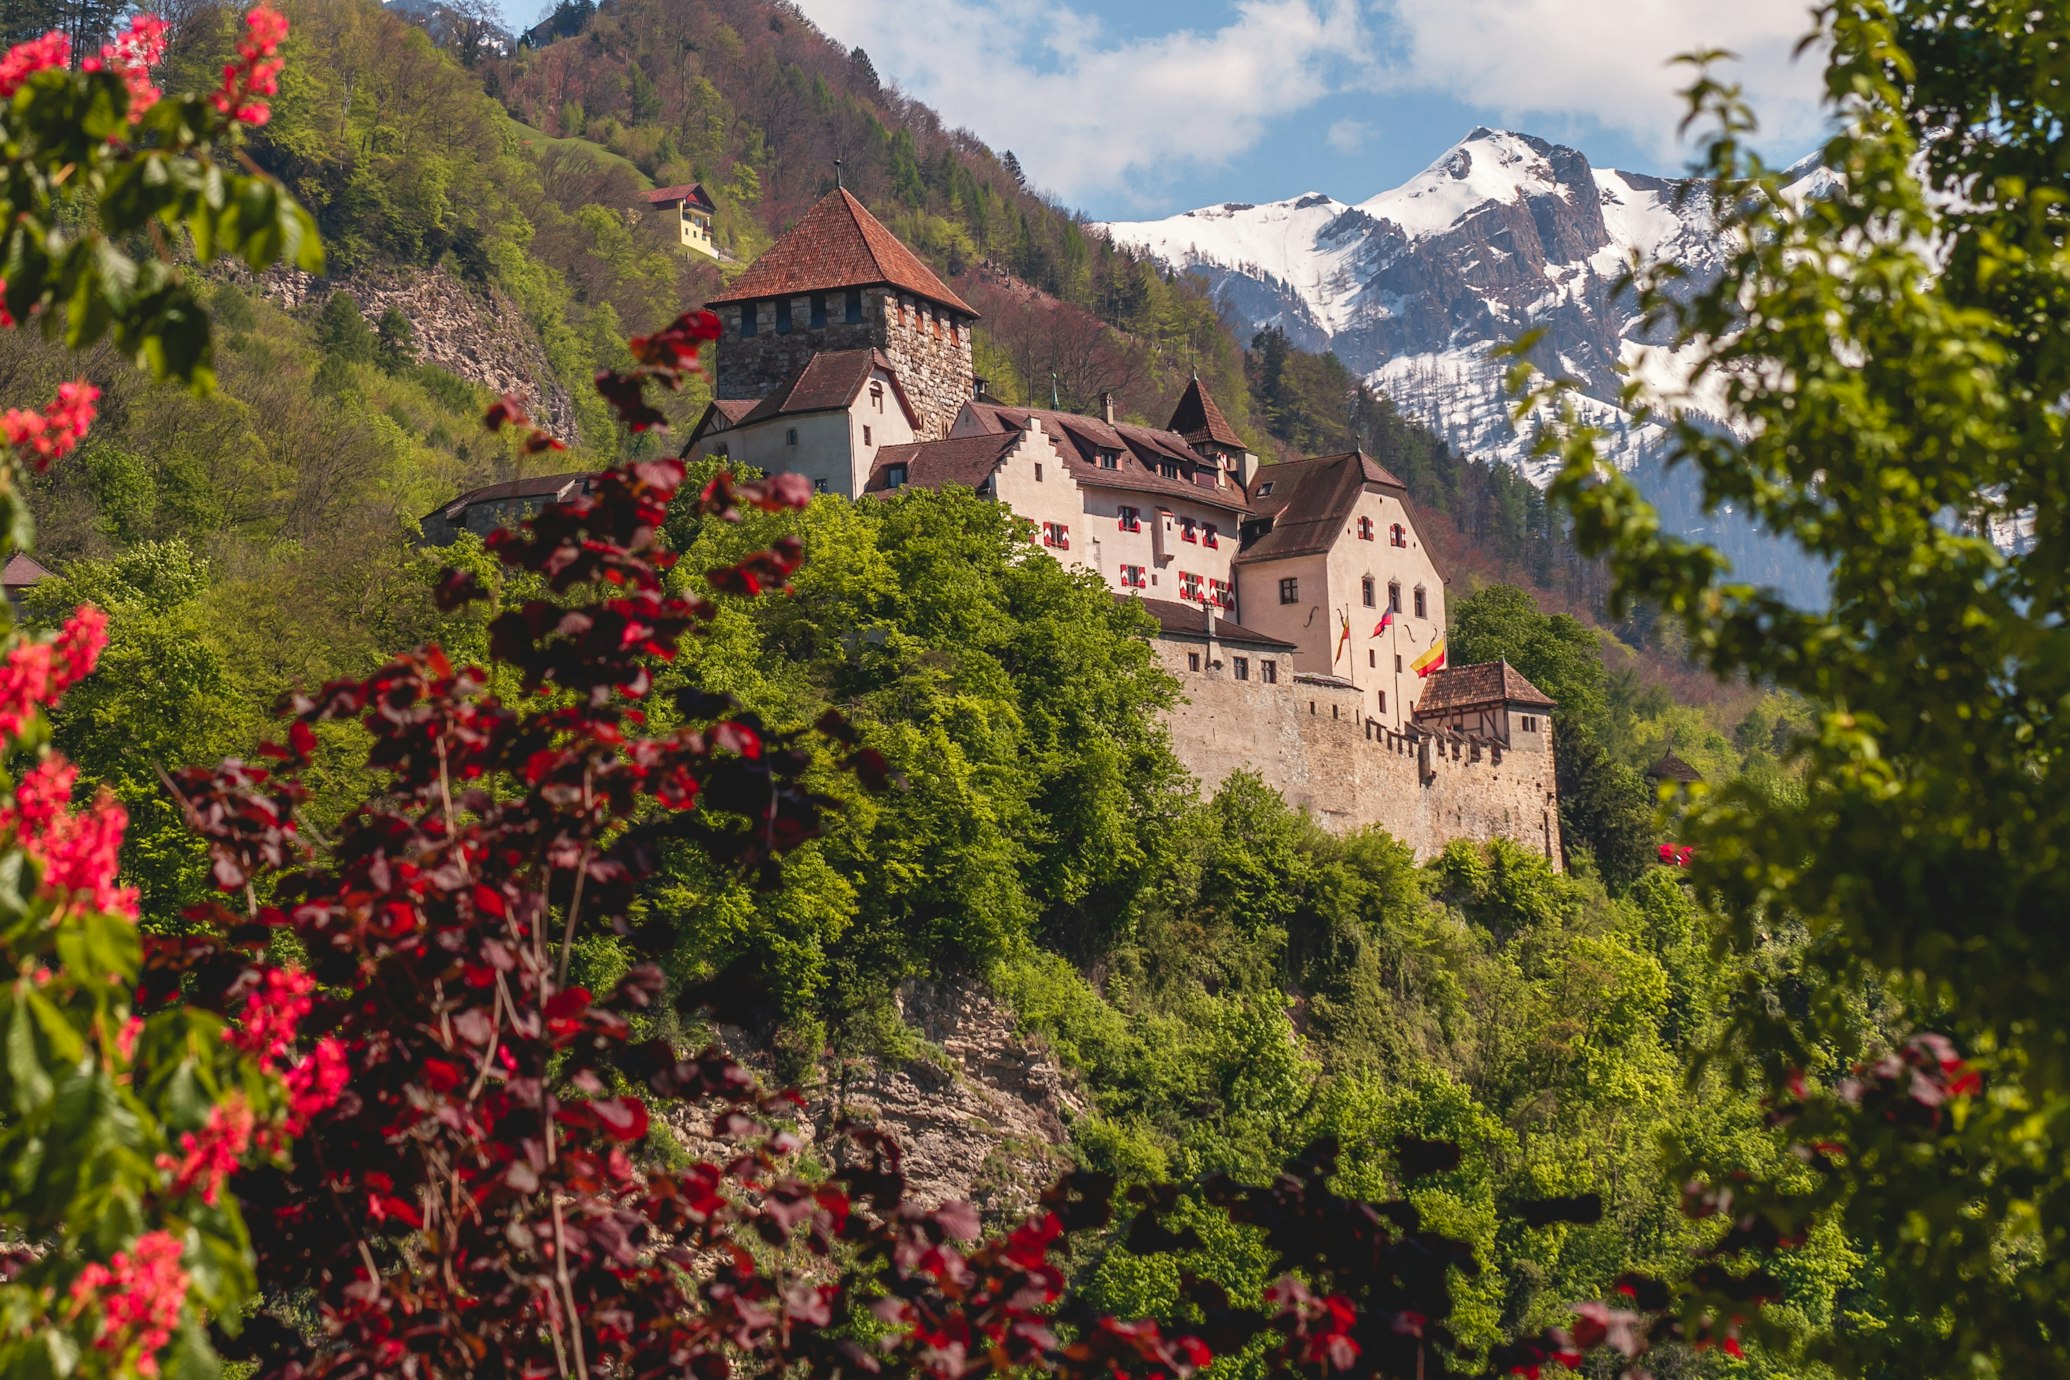 Liechtenstein Travel Guide - Attractions, What to See, Do, Costs, FAQs